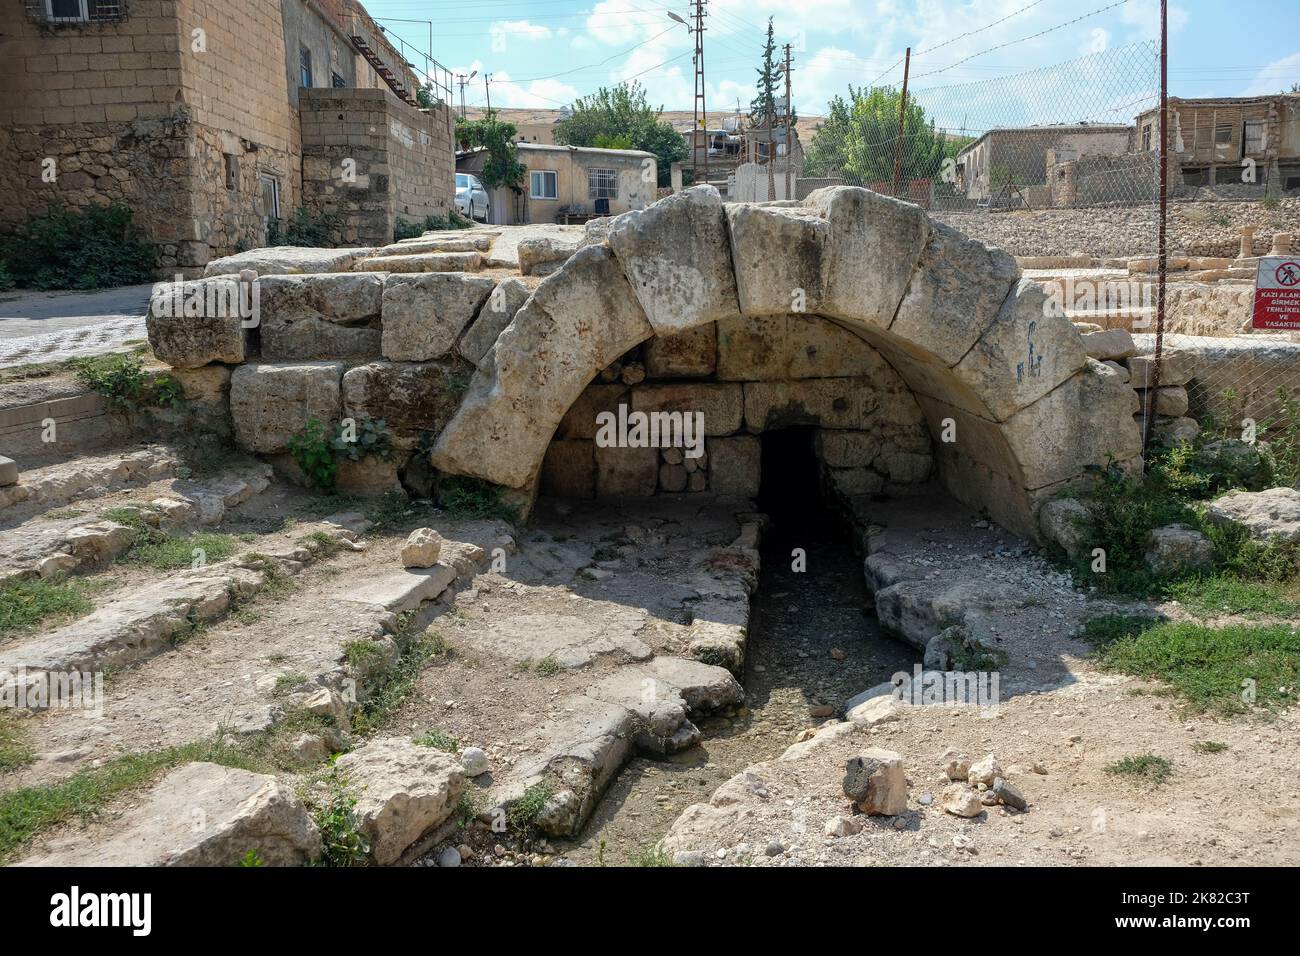 Archaeological excavations in the ancient city of Perre unearthed a historical Roman fountain, large blocks of stones, a furnace structure, water chan Stock Photo